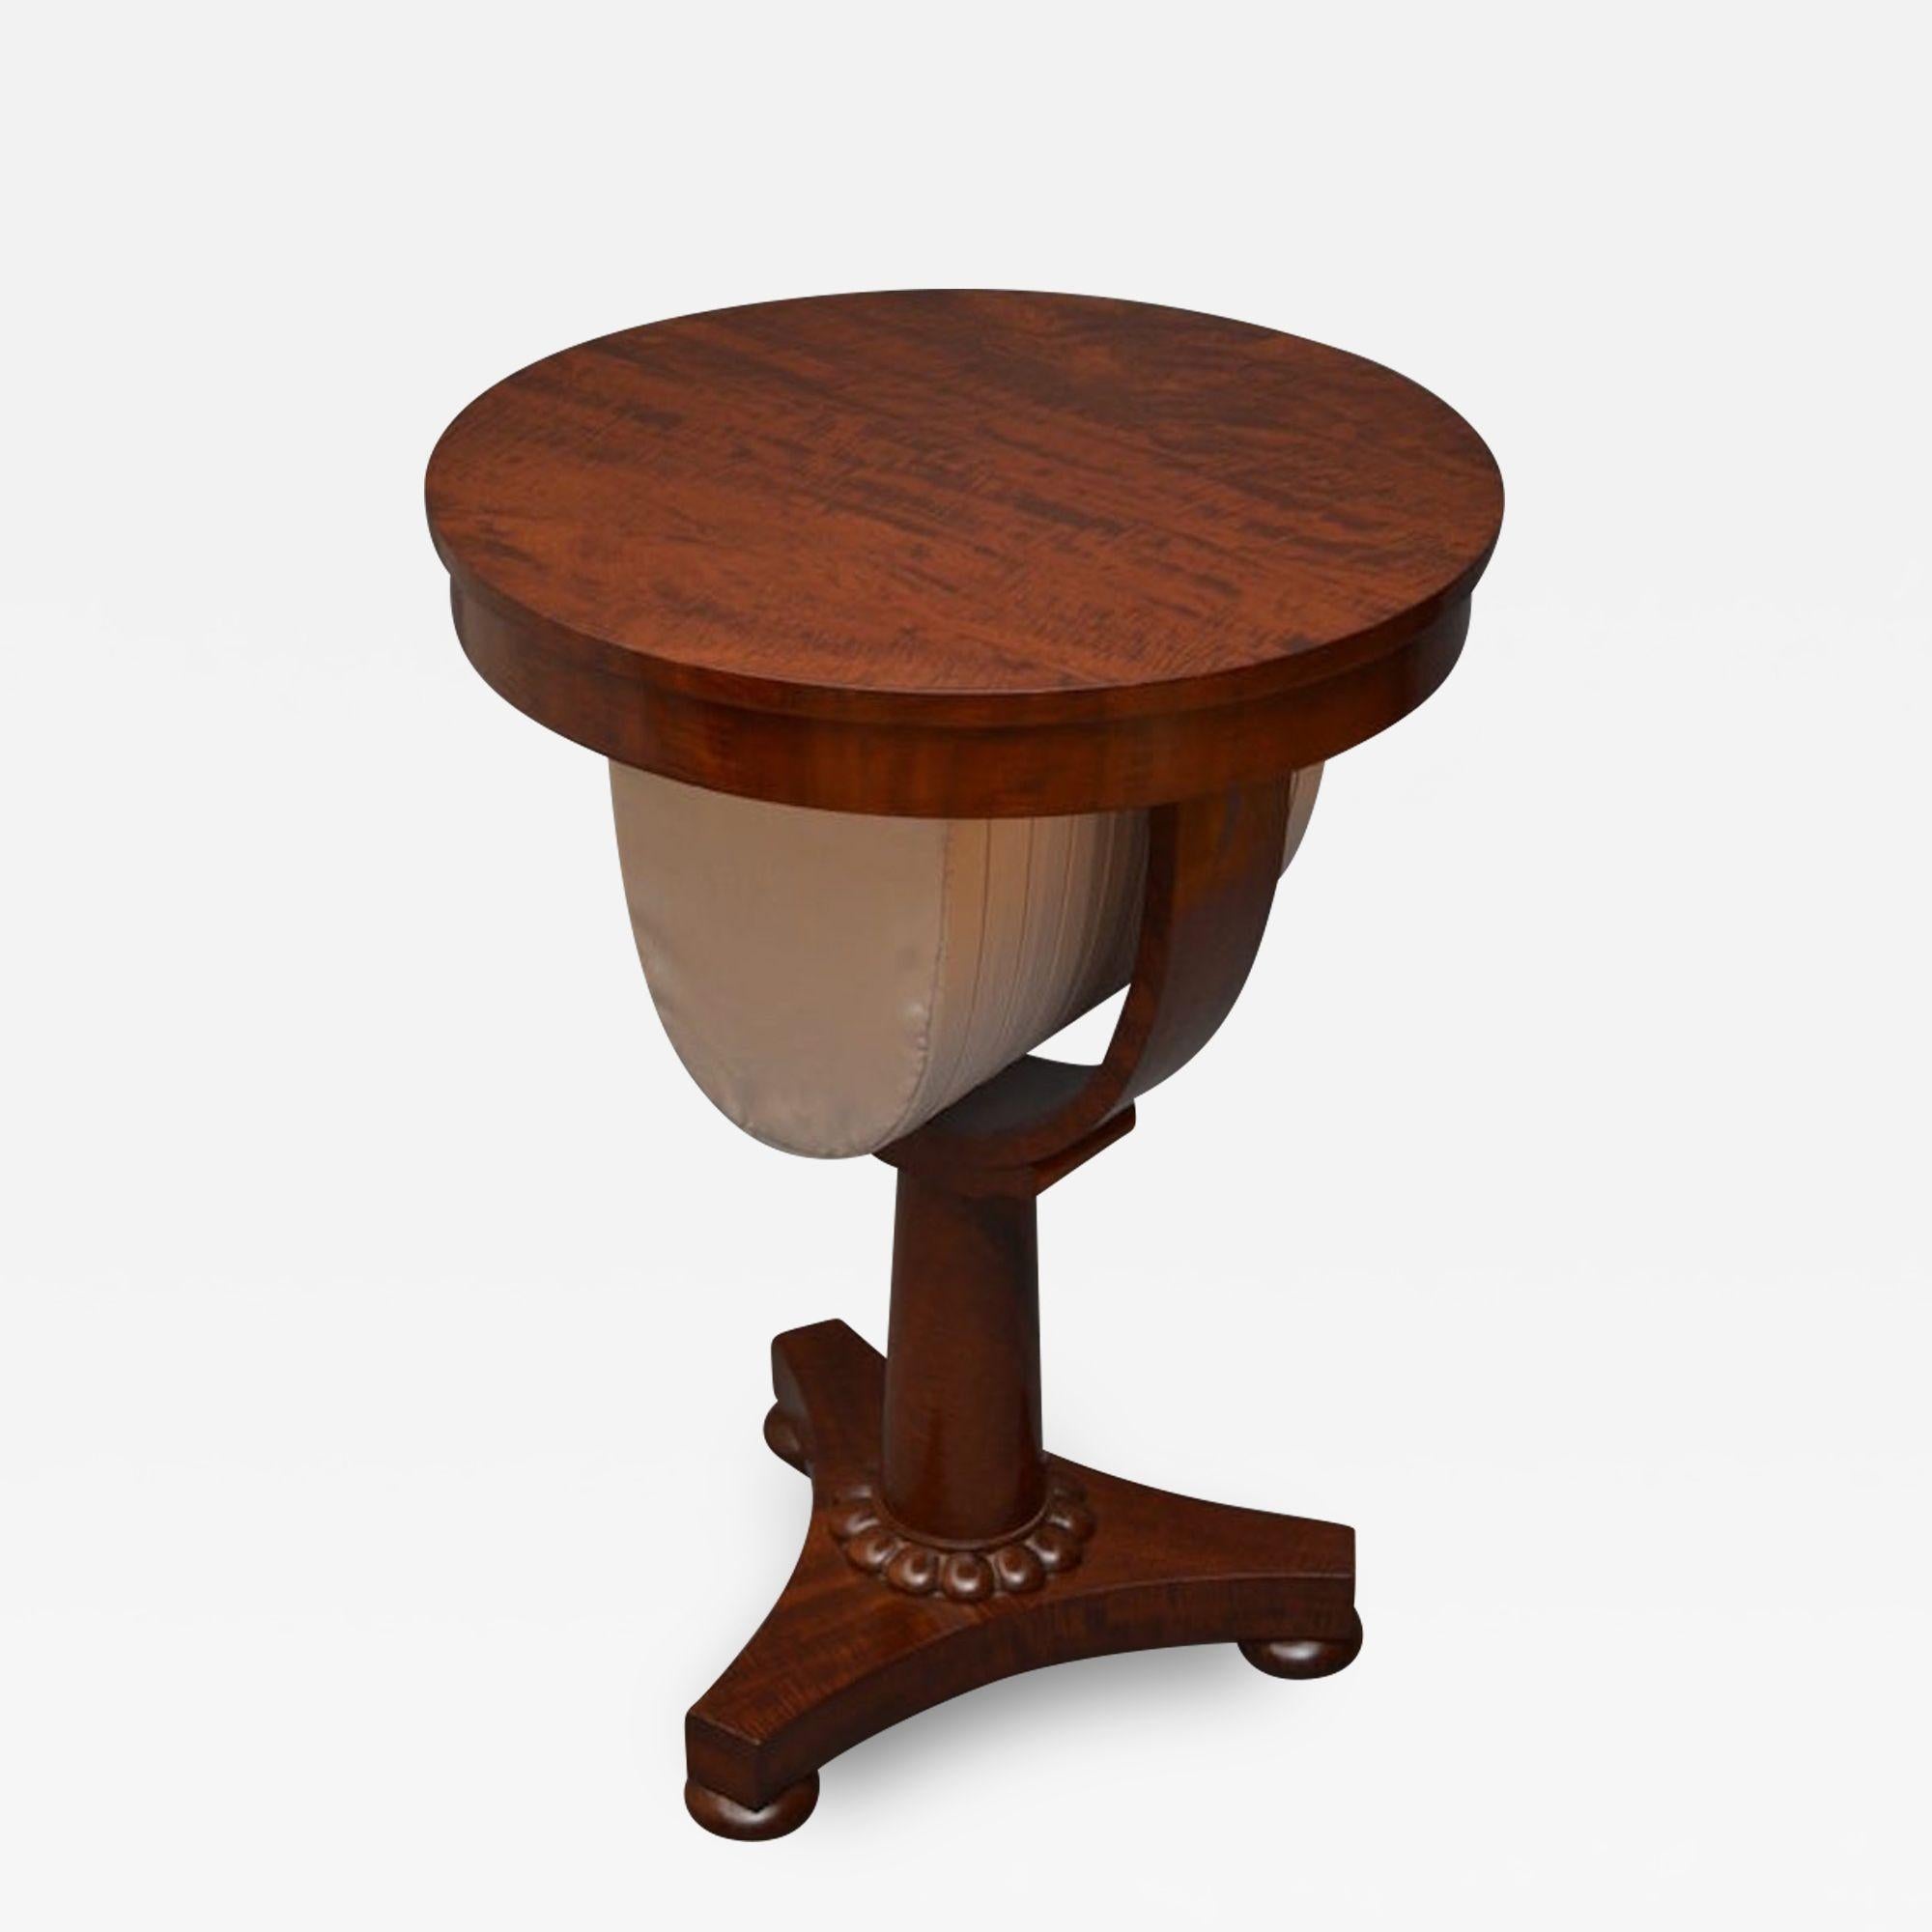 Sn765 Fine quality William IV mahogany work table, having circular top with single drawer to frieze and sewing bag below with pleated silk cover, stands on tapering cylinder pedestal with carved collar and platform base terminating in bun feet. All